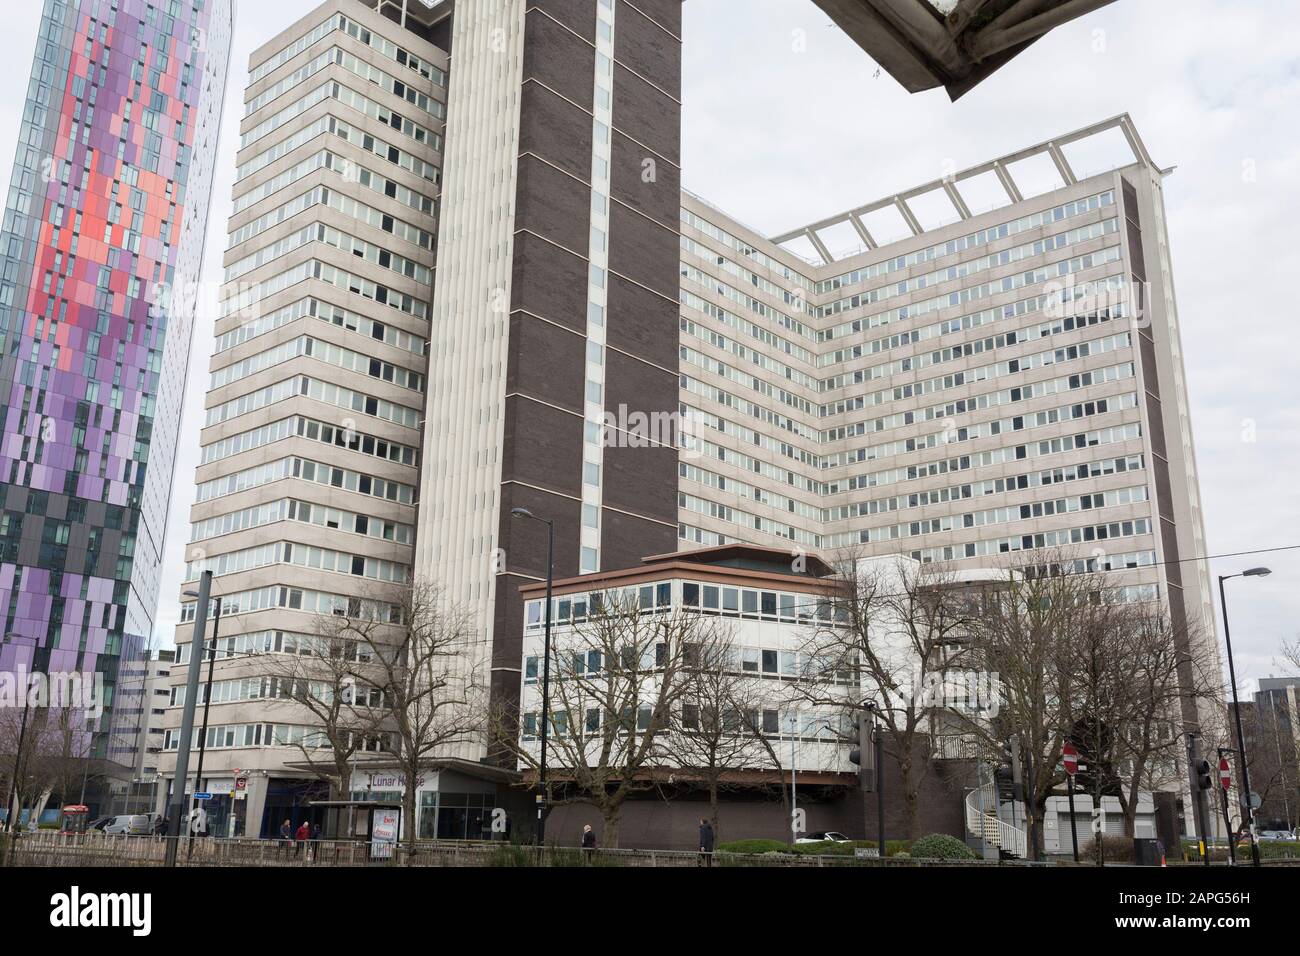 An exterior of Lunar House, the headquarters of 'UK Visas and Immigration', a division of the Home Office on Wellesley Road, Croydon, on 20th January 2020, in Croydon, London, England. Lunar House was completed in 1970, inspired by the landing of Apollo 11 on the Moon in 1969. Stock Photo